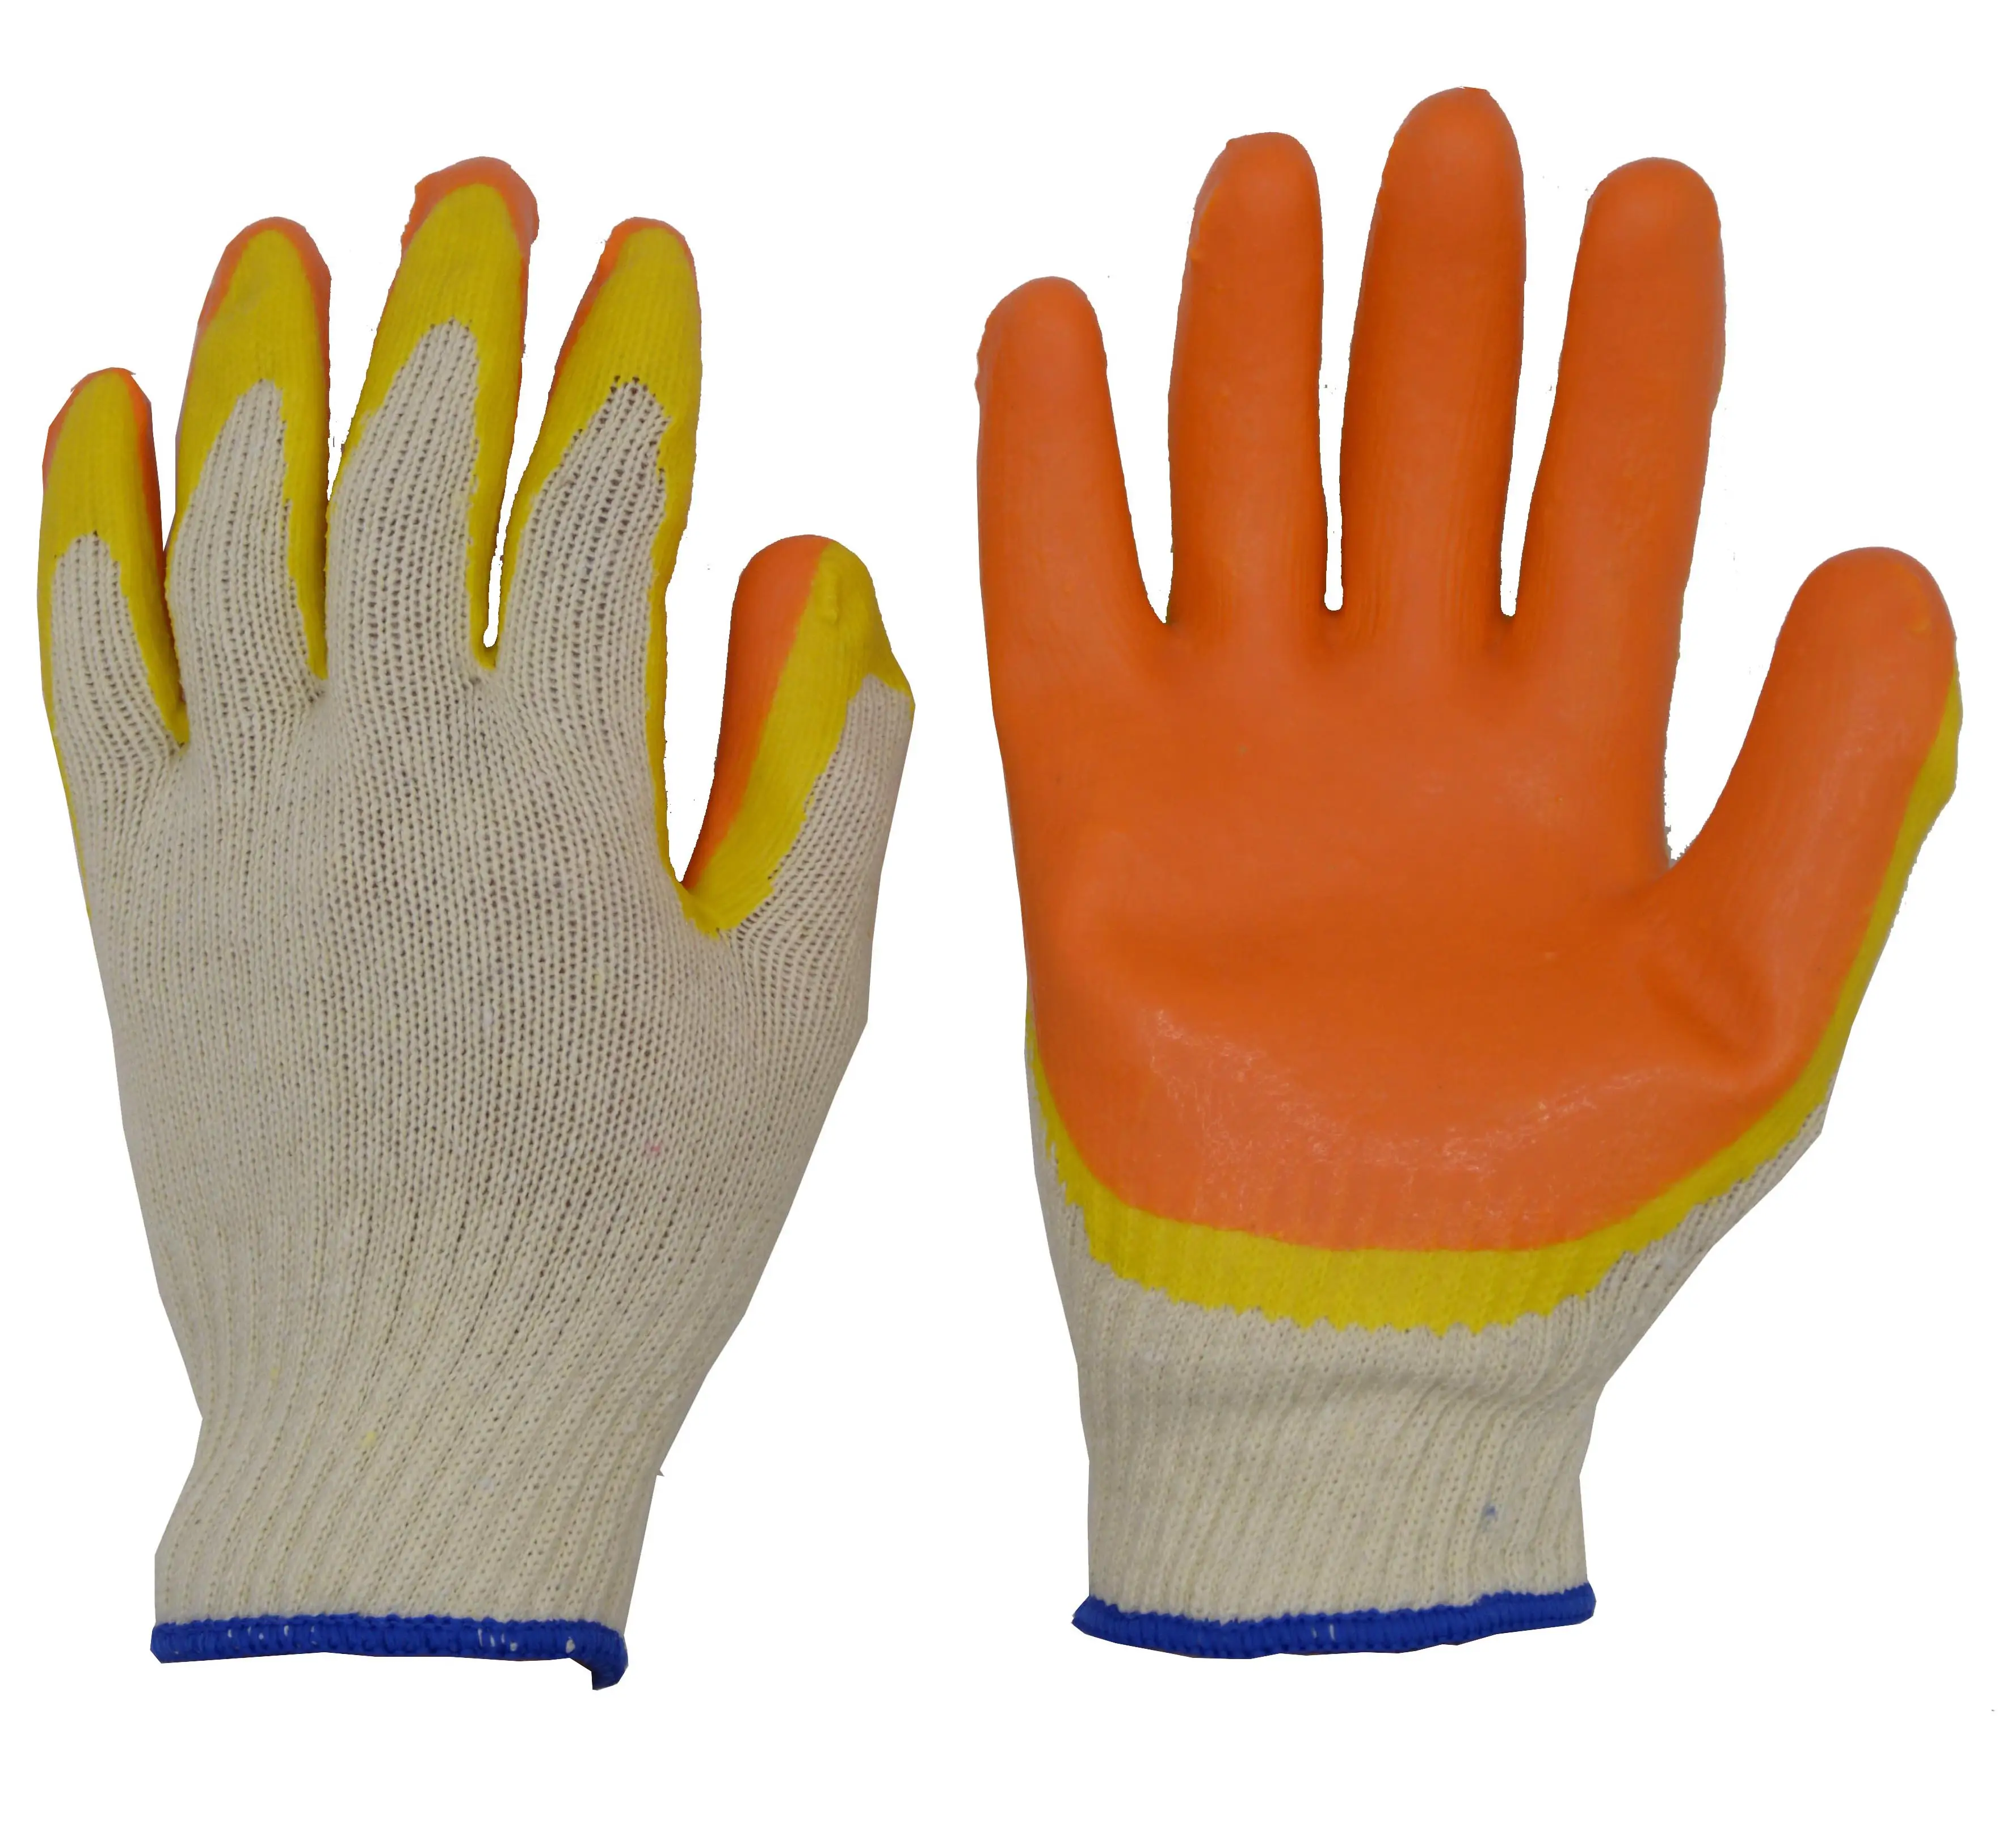 13 gauge cotton liner double dipped Orange Latex Coated Industrial Work Gloves